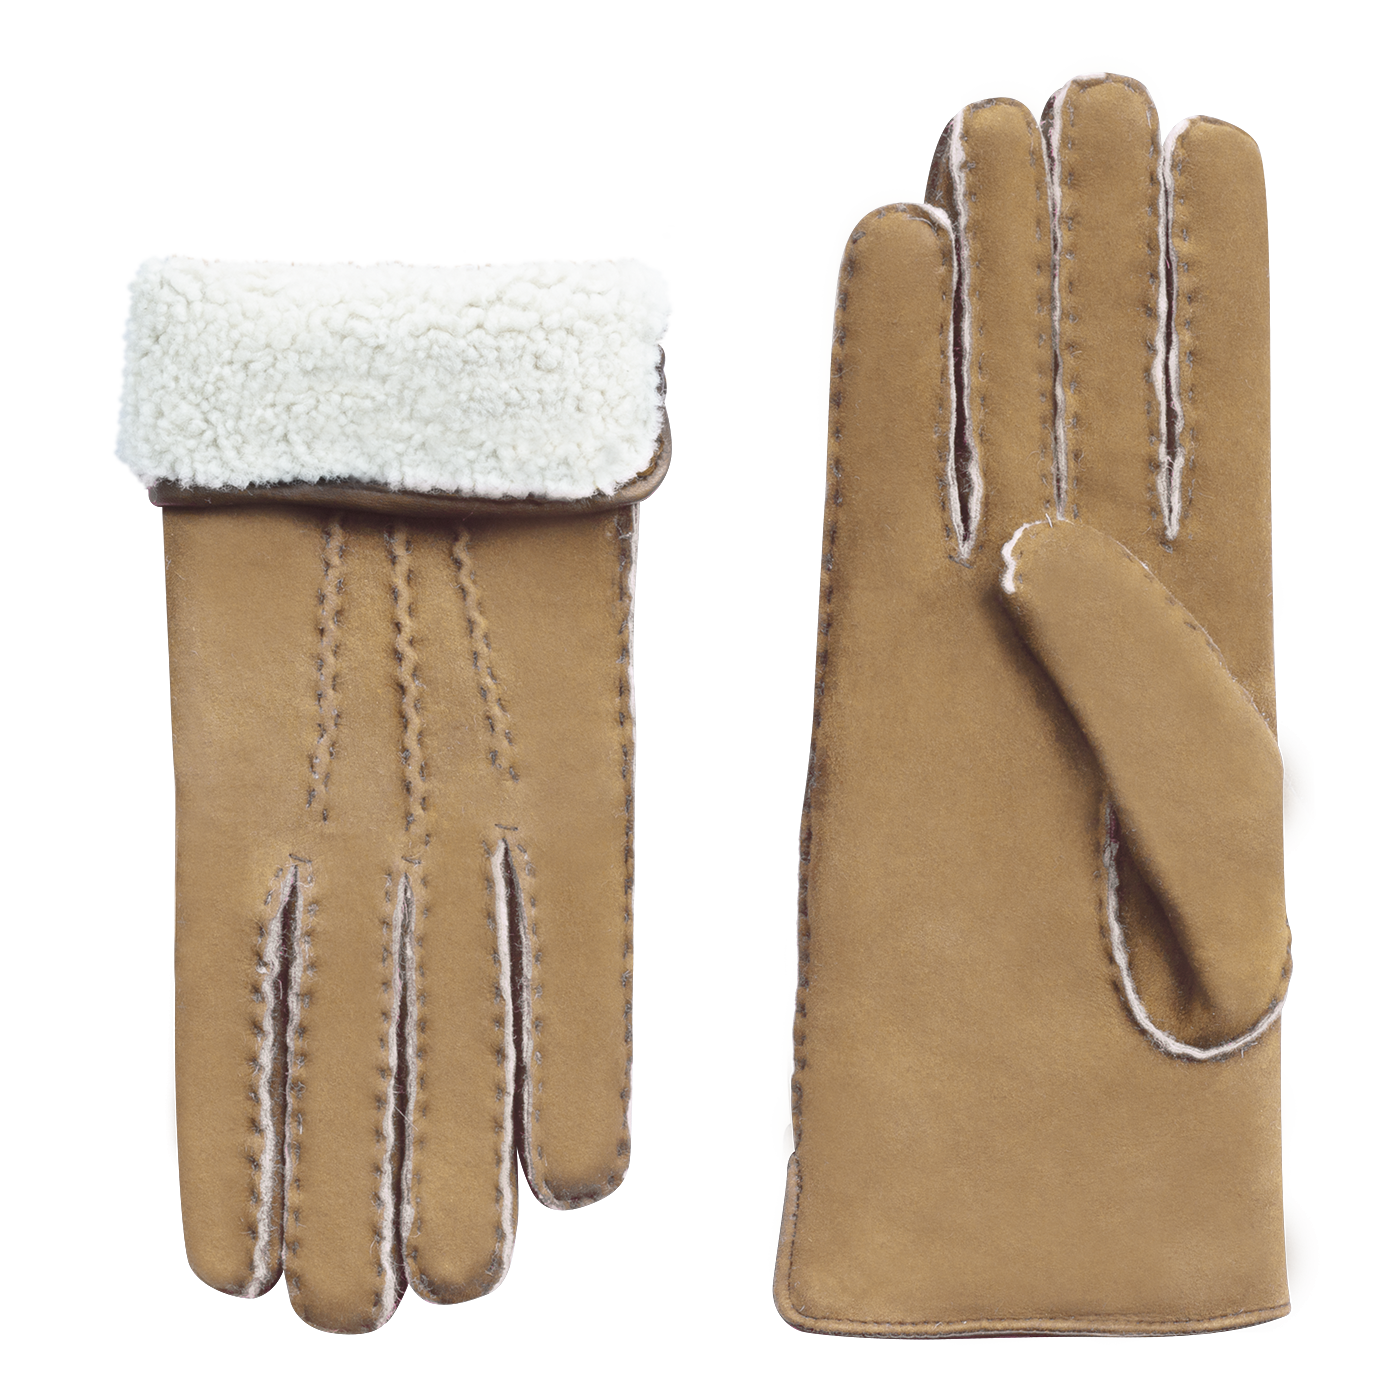 Vantaa - Hand sewn lammy ladies' gloves with leather piping - Laimböck